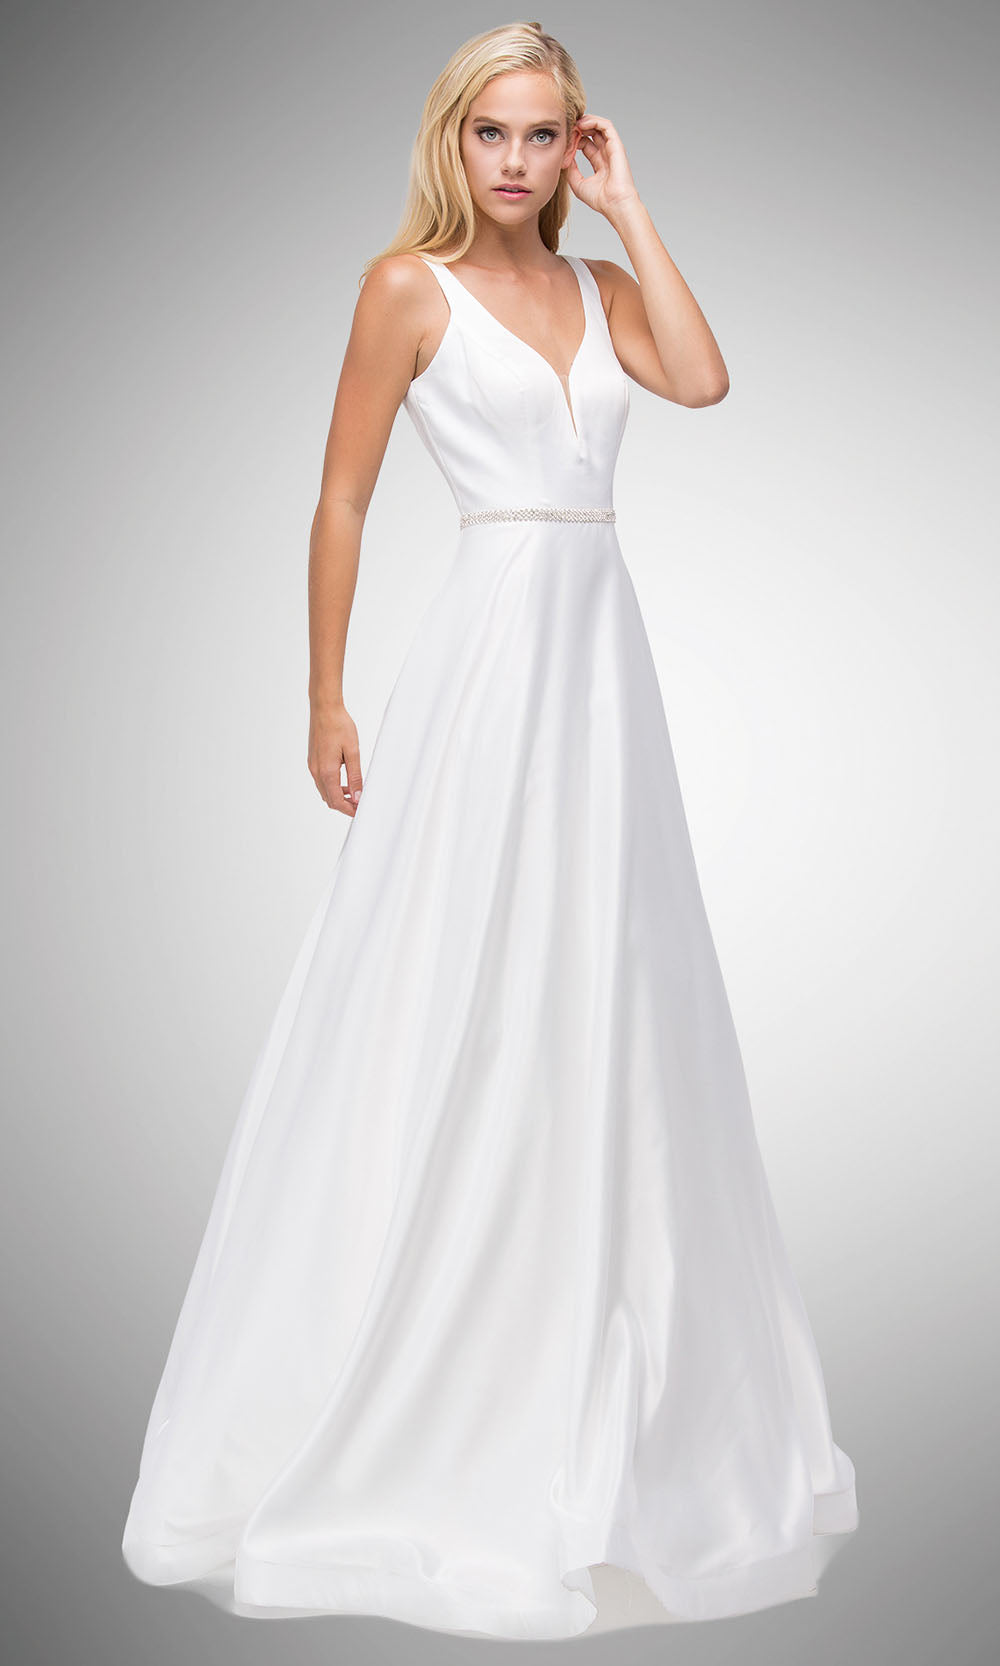 Dancing Queen - 9754 Sleeveless Jeweled Waist A-Line Dress In White & Ivory